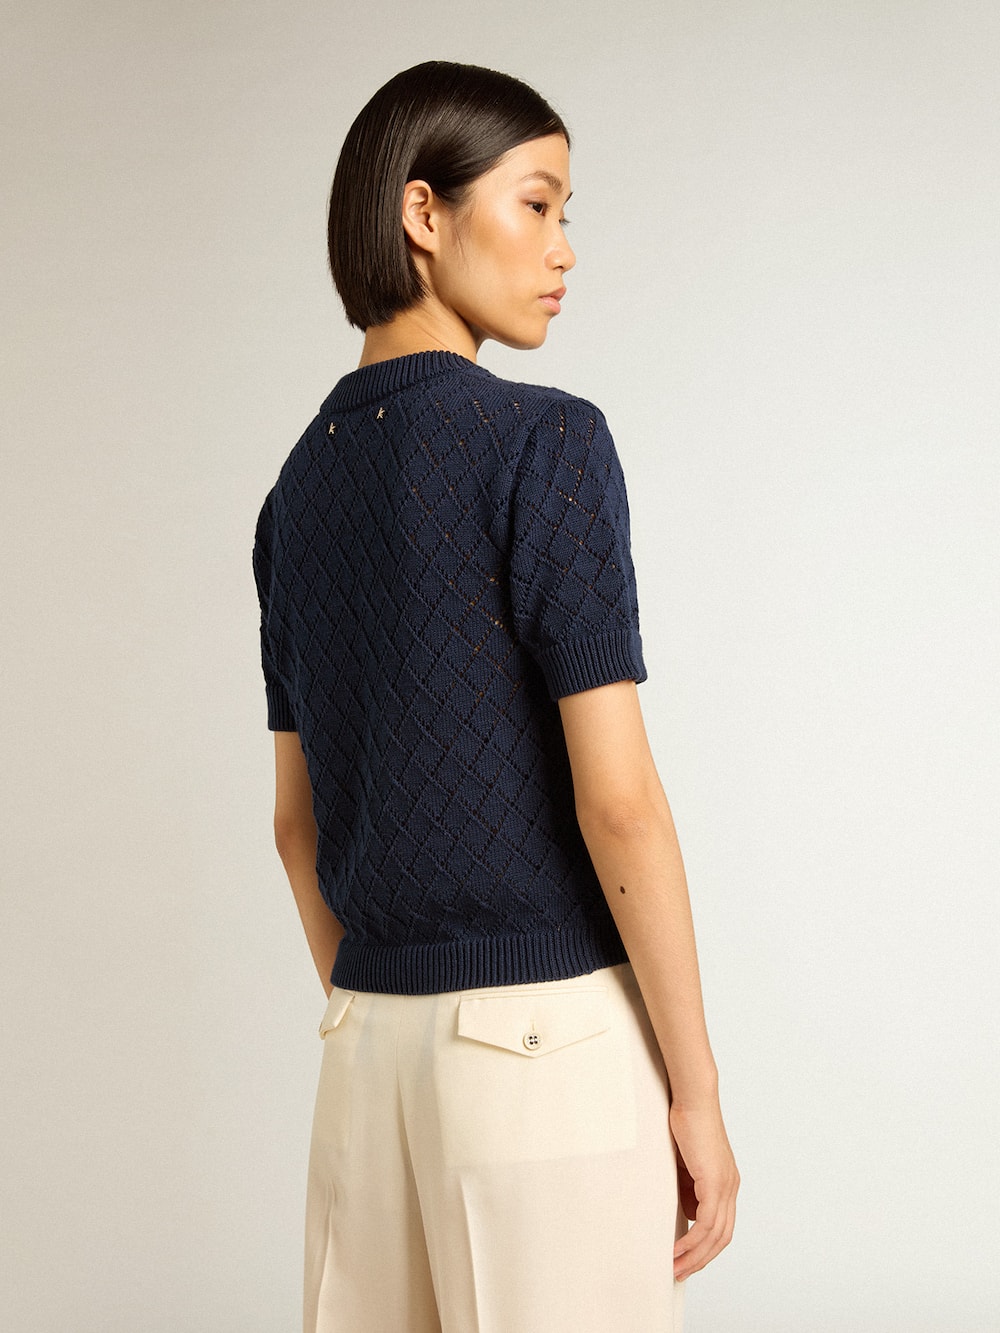 Golden Goose - Open-weave knit with midnight blue argyle pattern in 